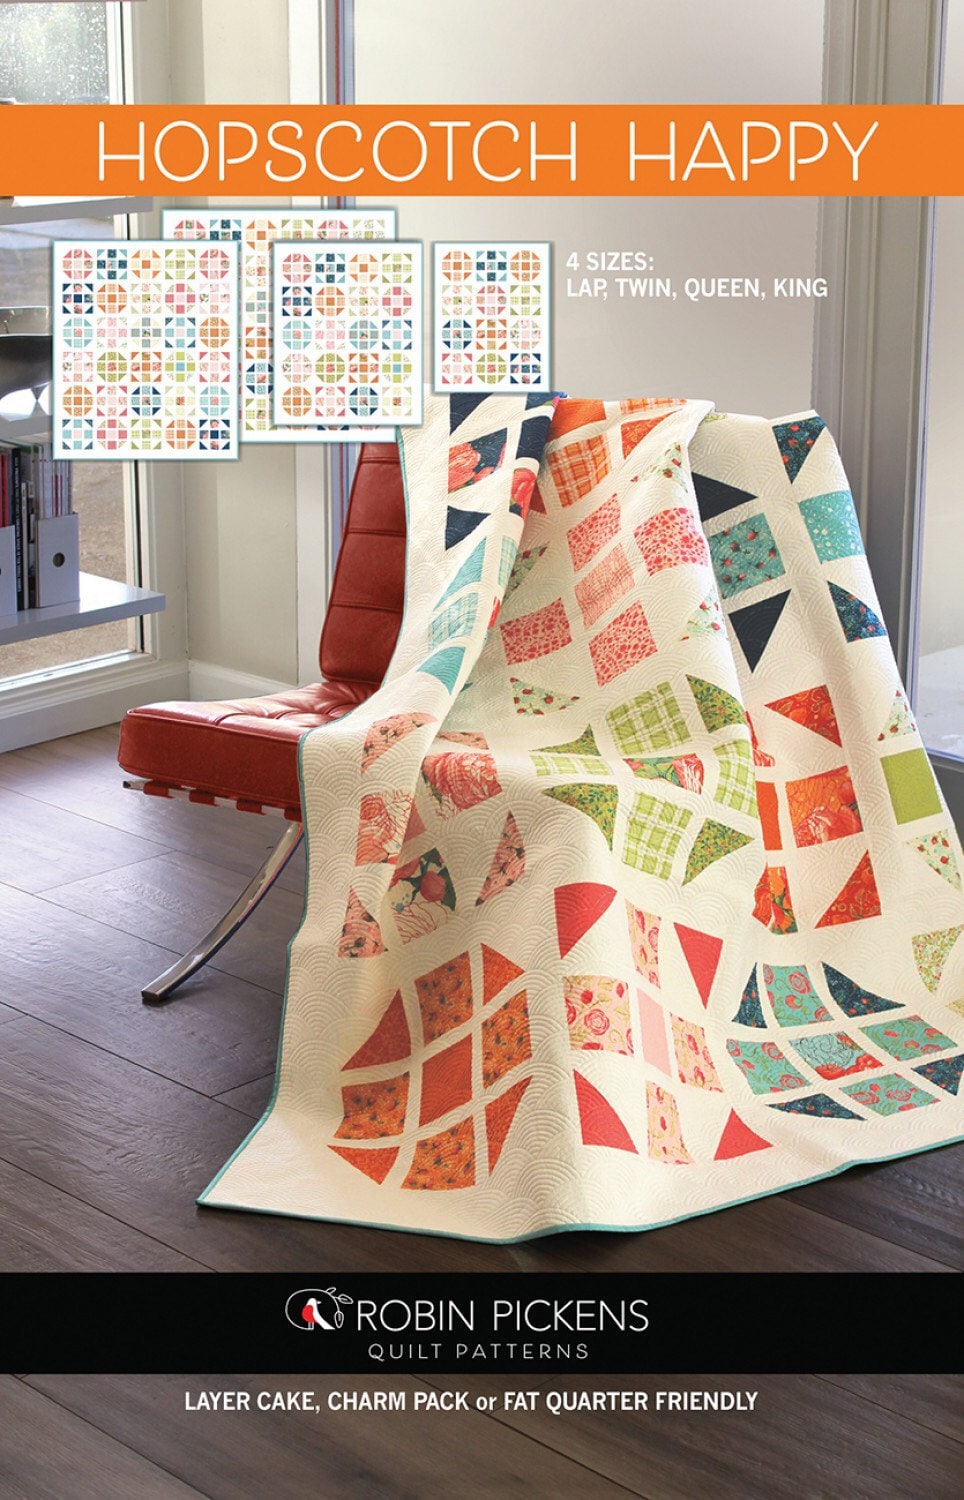 Hopscotch Happy Quilt Pattern - Robin Pickens - Layer Cake Friendly - Fat Quarter Friendly - 4 sizes